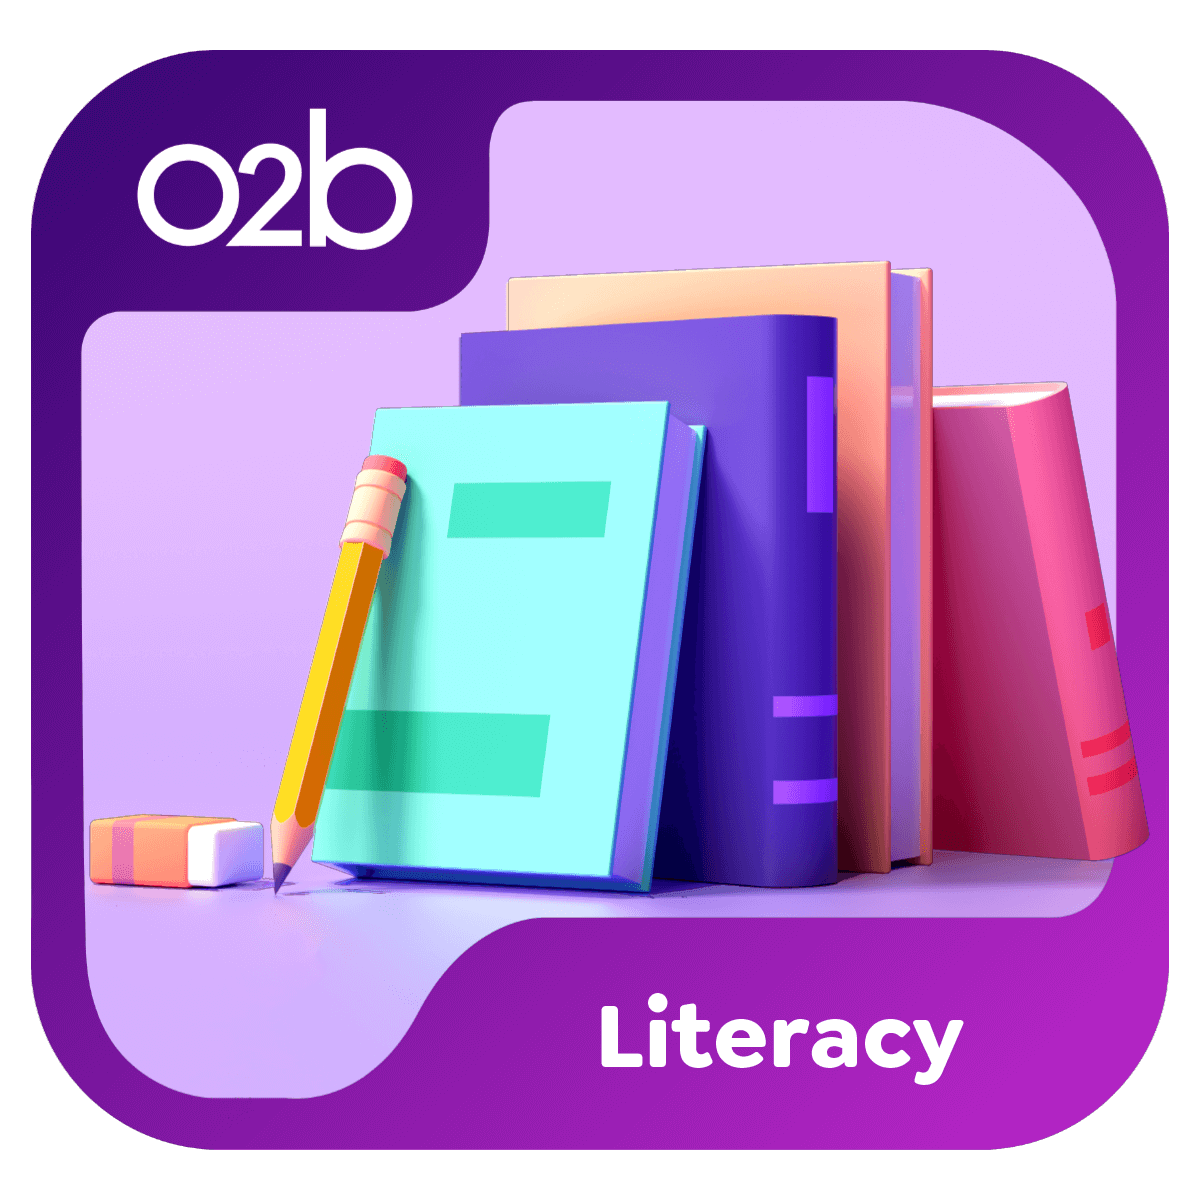 Books and a pencil/eraser on a purple background. O2B - Literacy